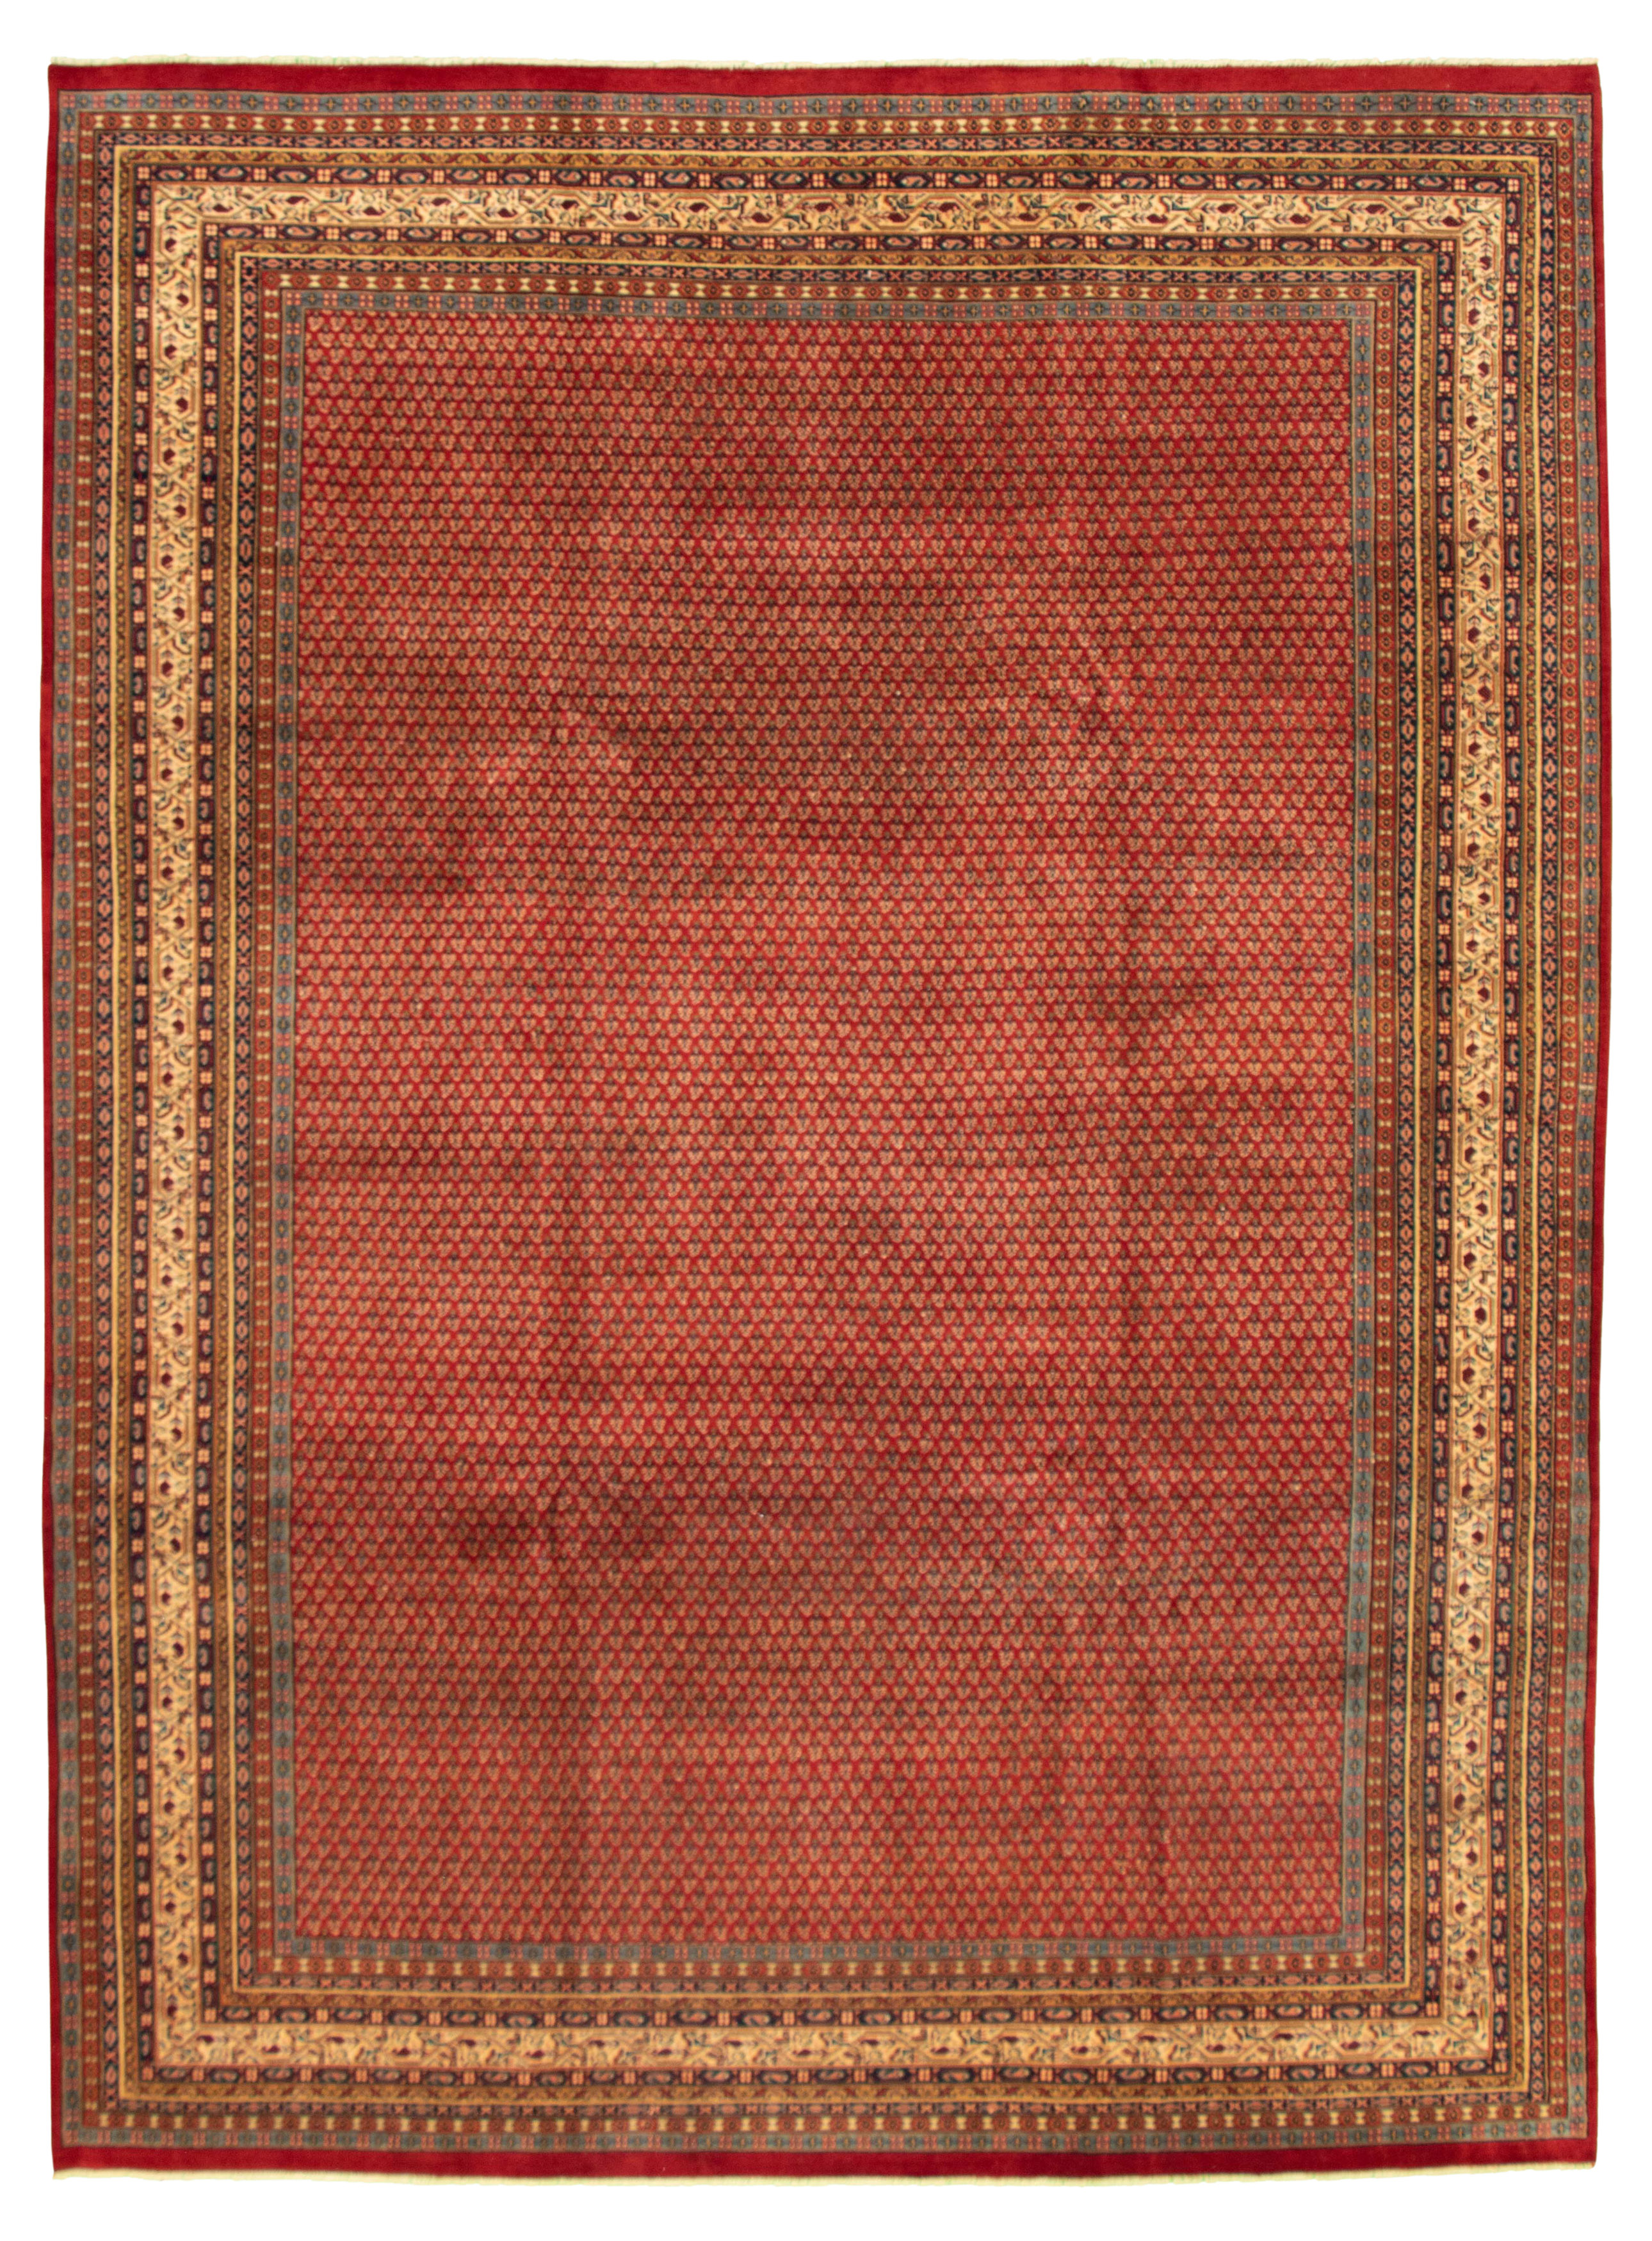 Hand-knotted Royal Sarough Red Wool Rug 8'3" x 11'3"  Size: 8'3" x 11'3"  